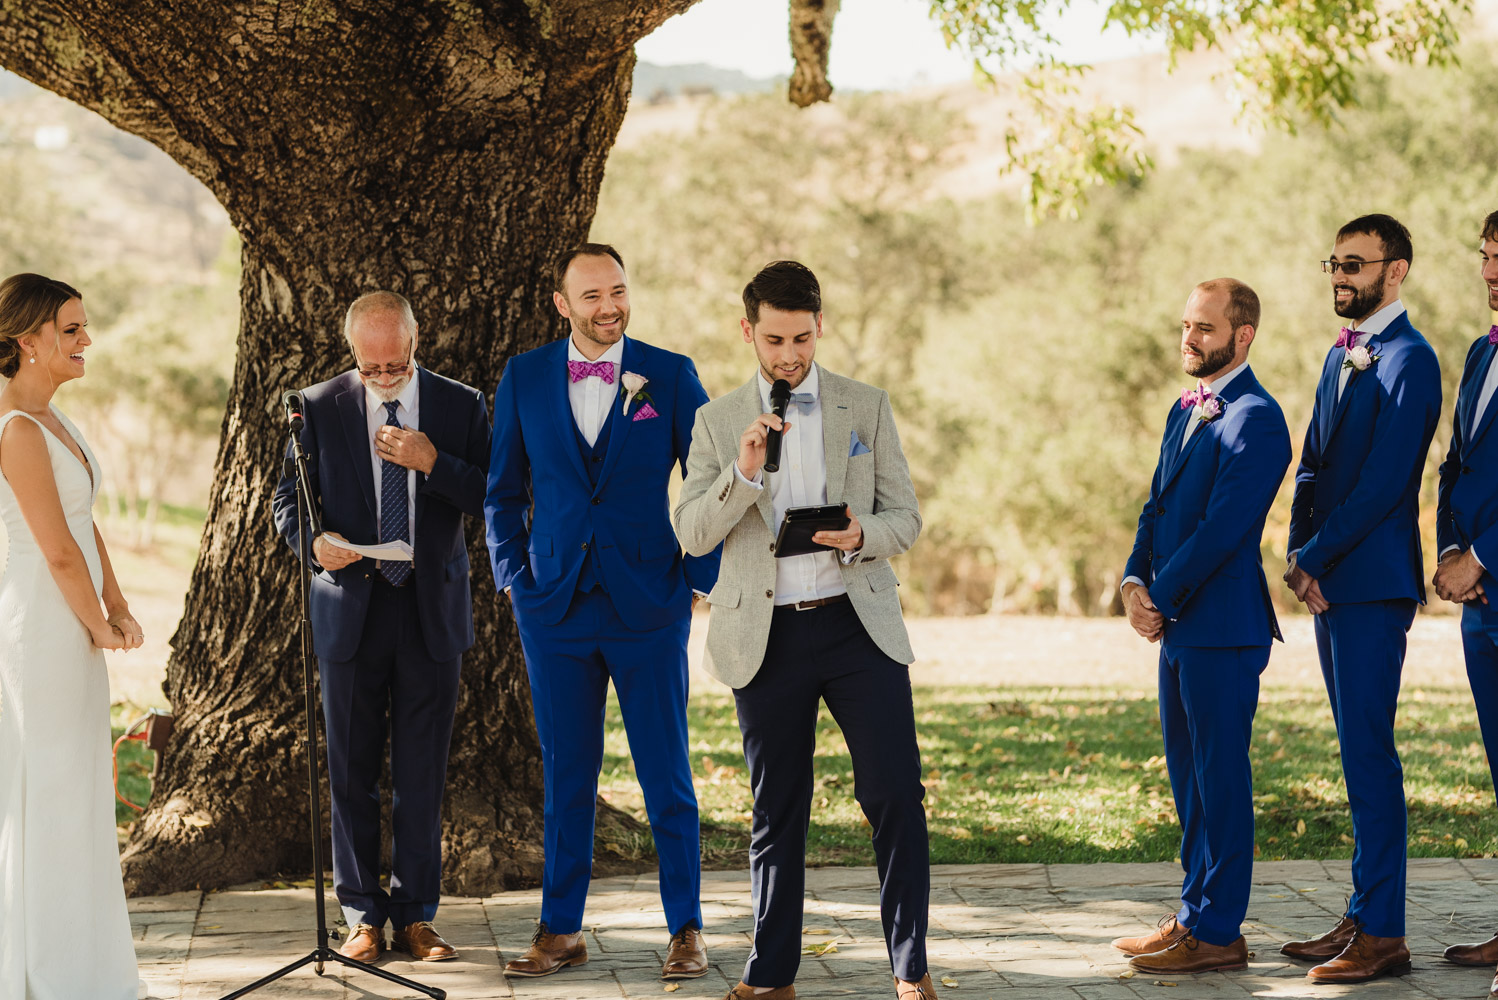 Triple S Ranch Wedding Venue, friend reading a poem during the ceremony photo